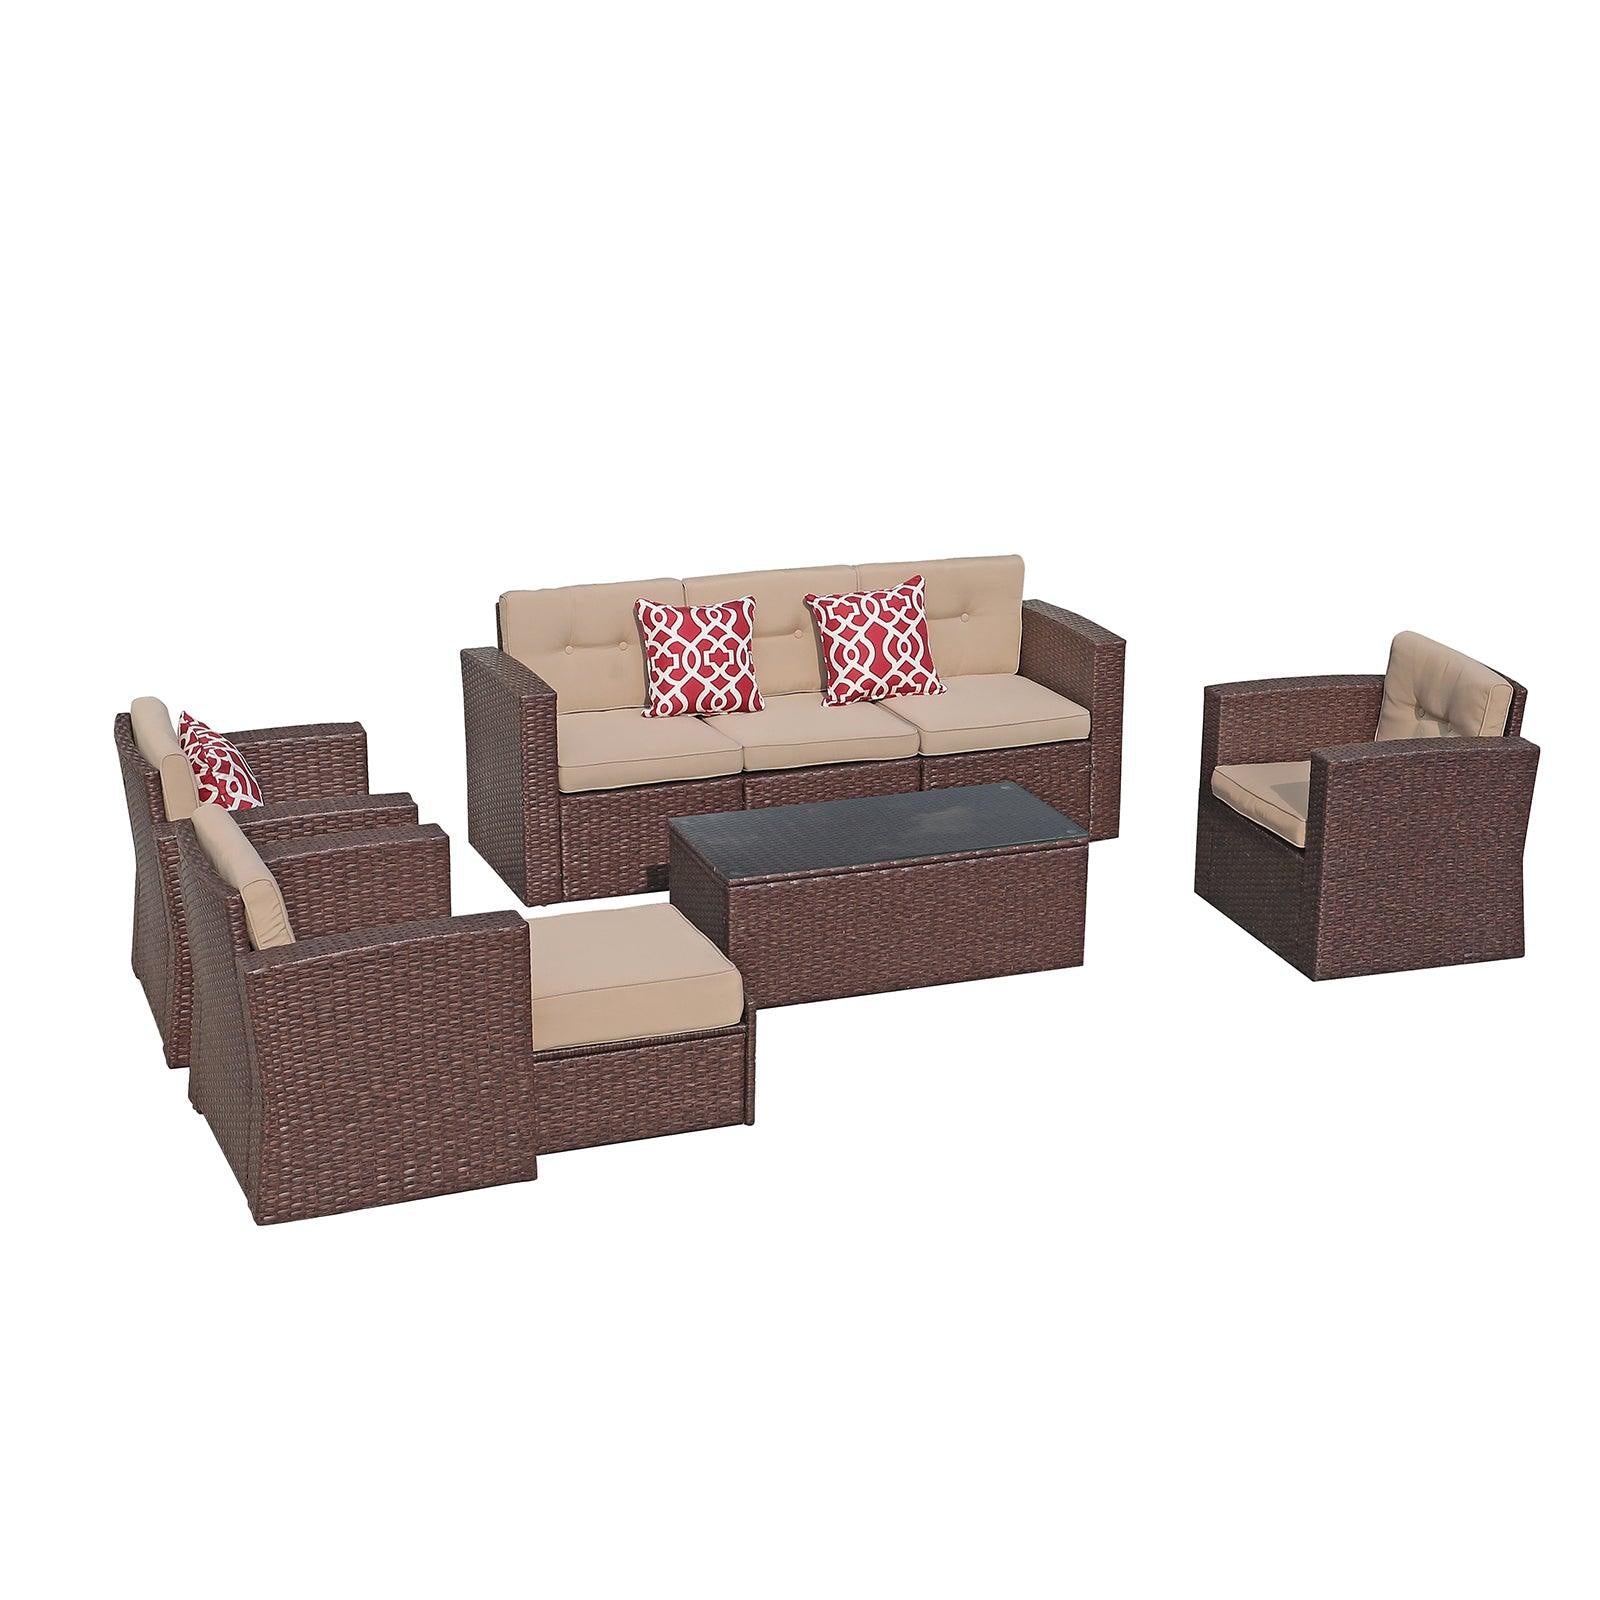 8pcs Patio Sectional Sets Wicker Outdoor Sofa Set with Beige Cushions | Orange-Casual